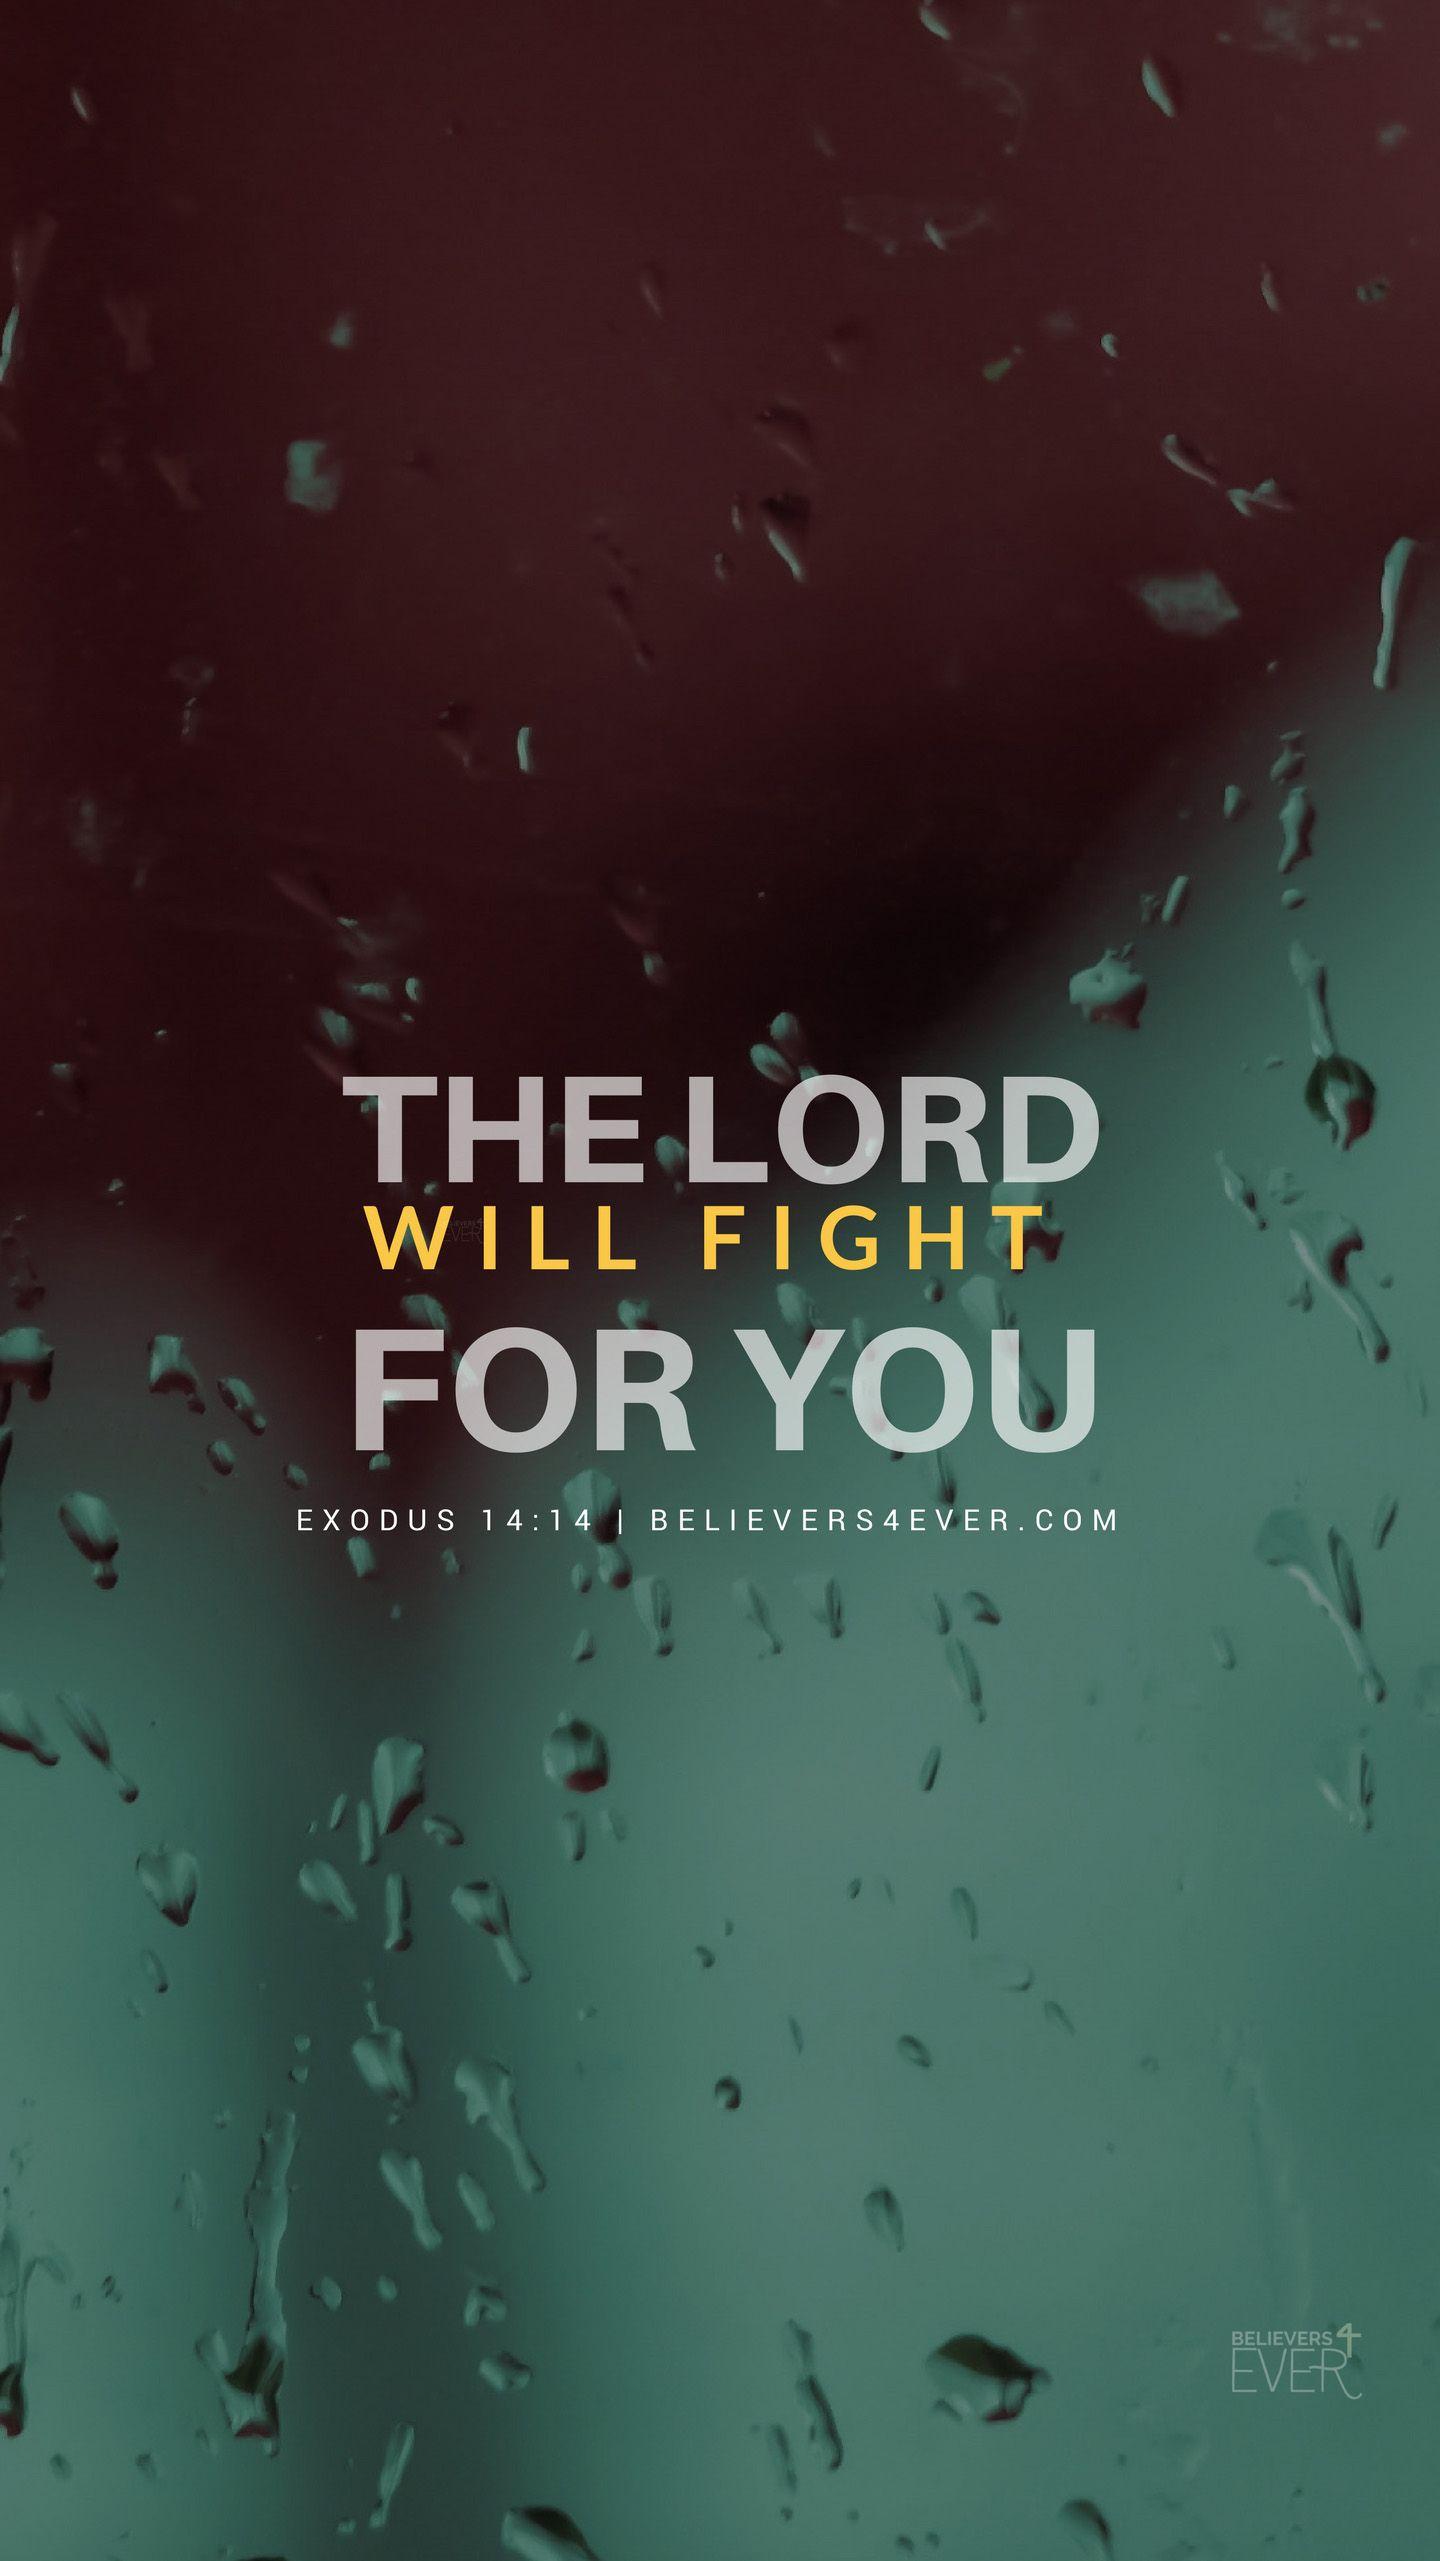 The Lord will fight for you. Bible quotes, Bible verse wallpaper